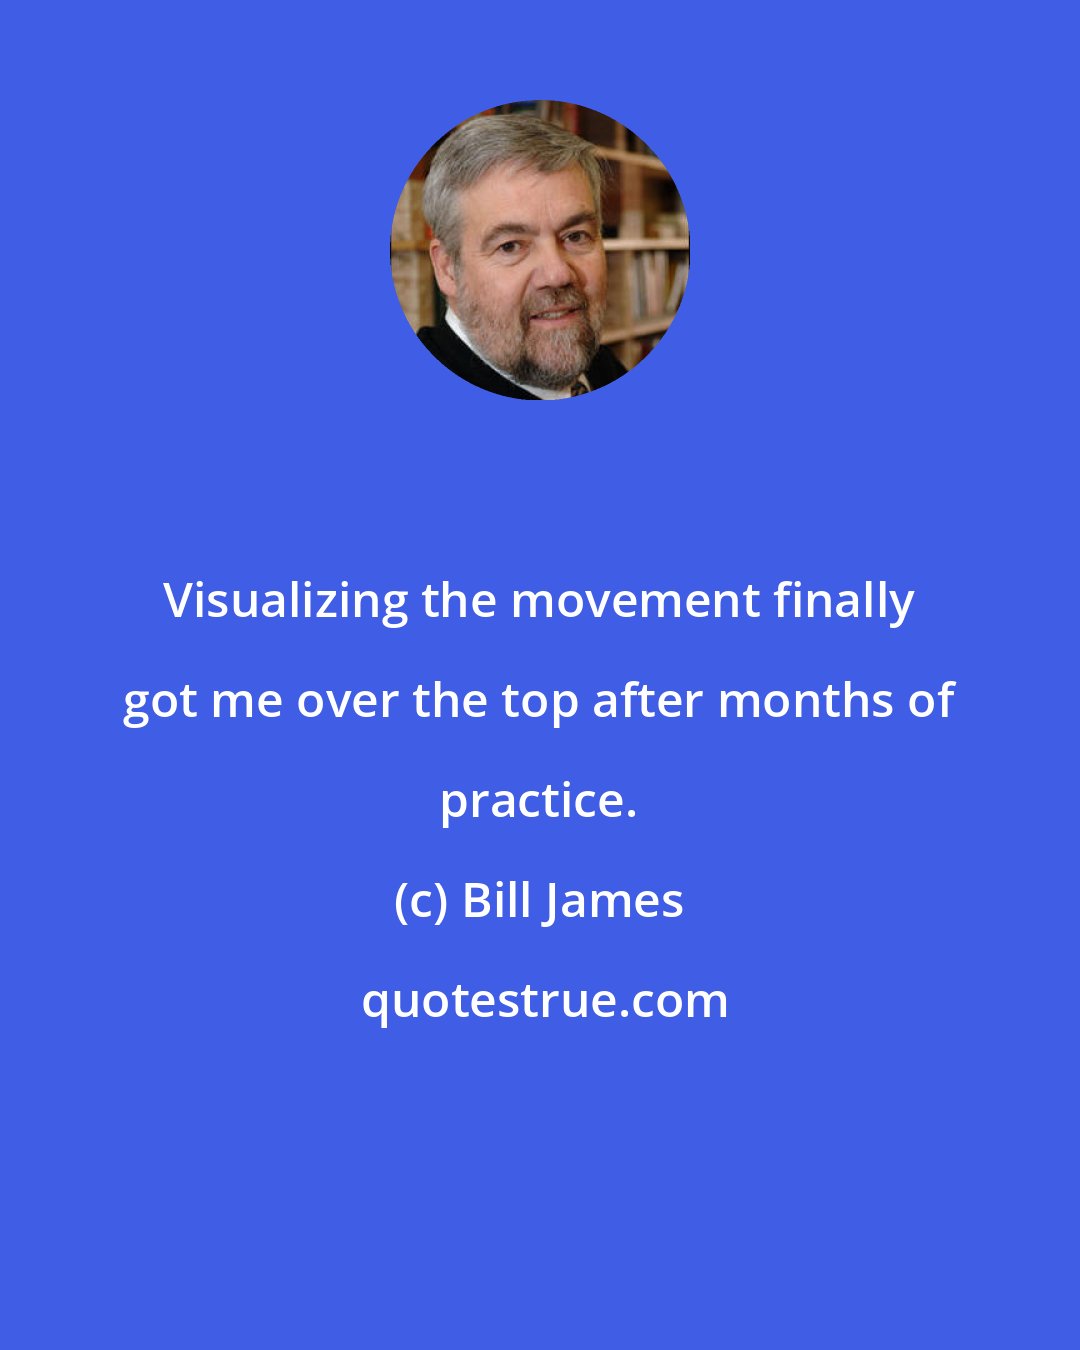 Bill James: Visualizing the movement finally got me over the top after months of practice.